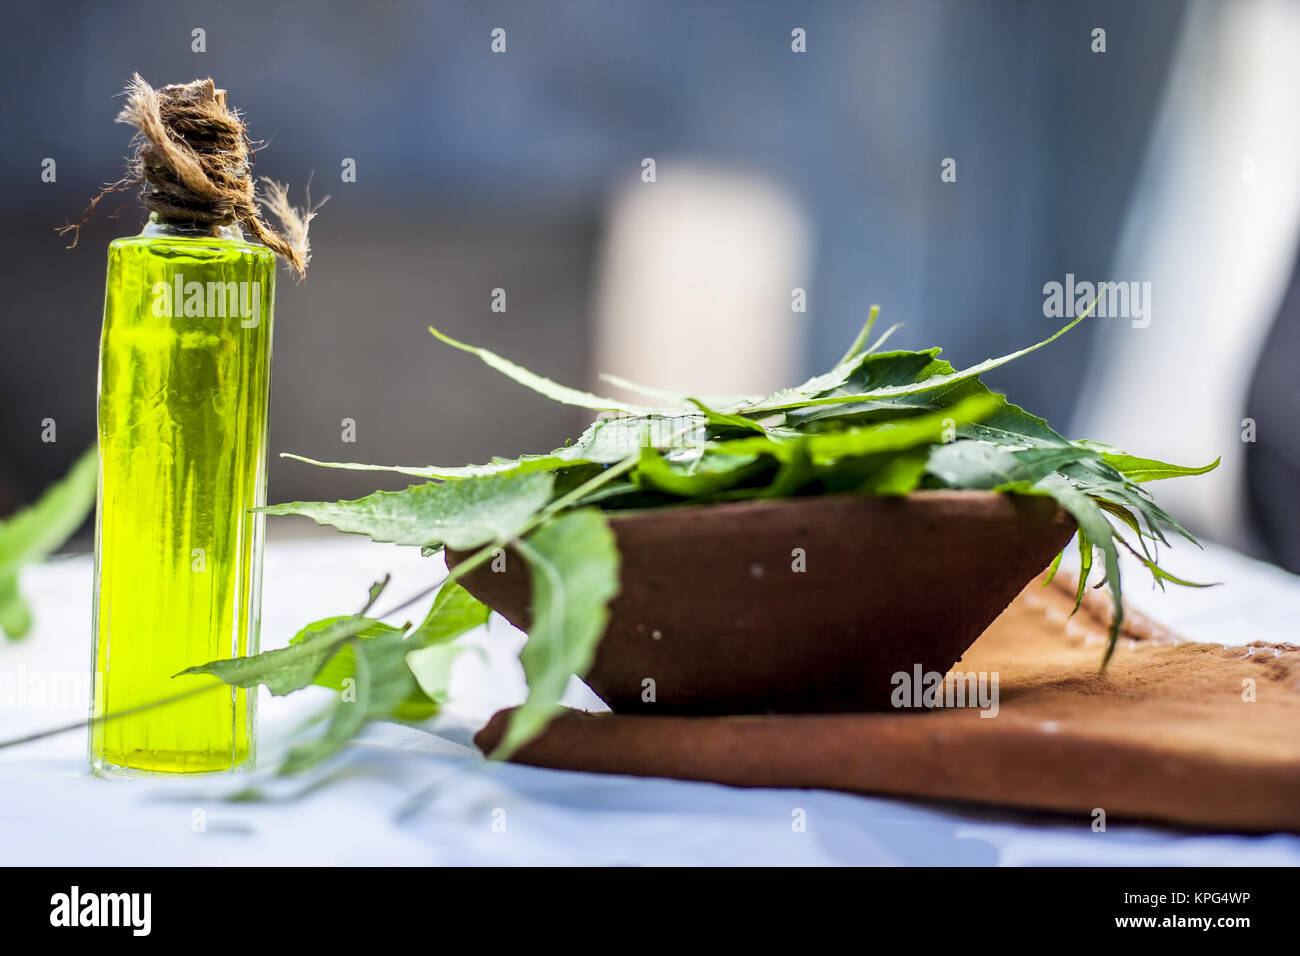 Azadirachta indica,Neem with its leaves and oil in a bottle  in a clay bowl for skin care.; Stock Photo